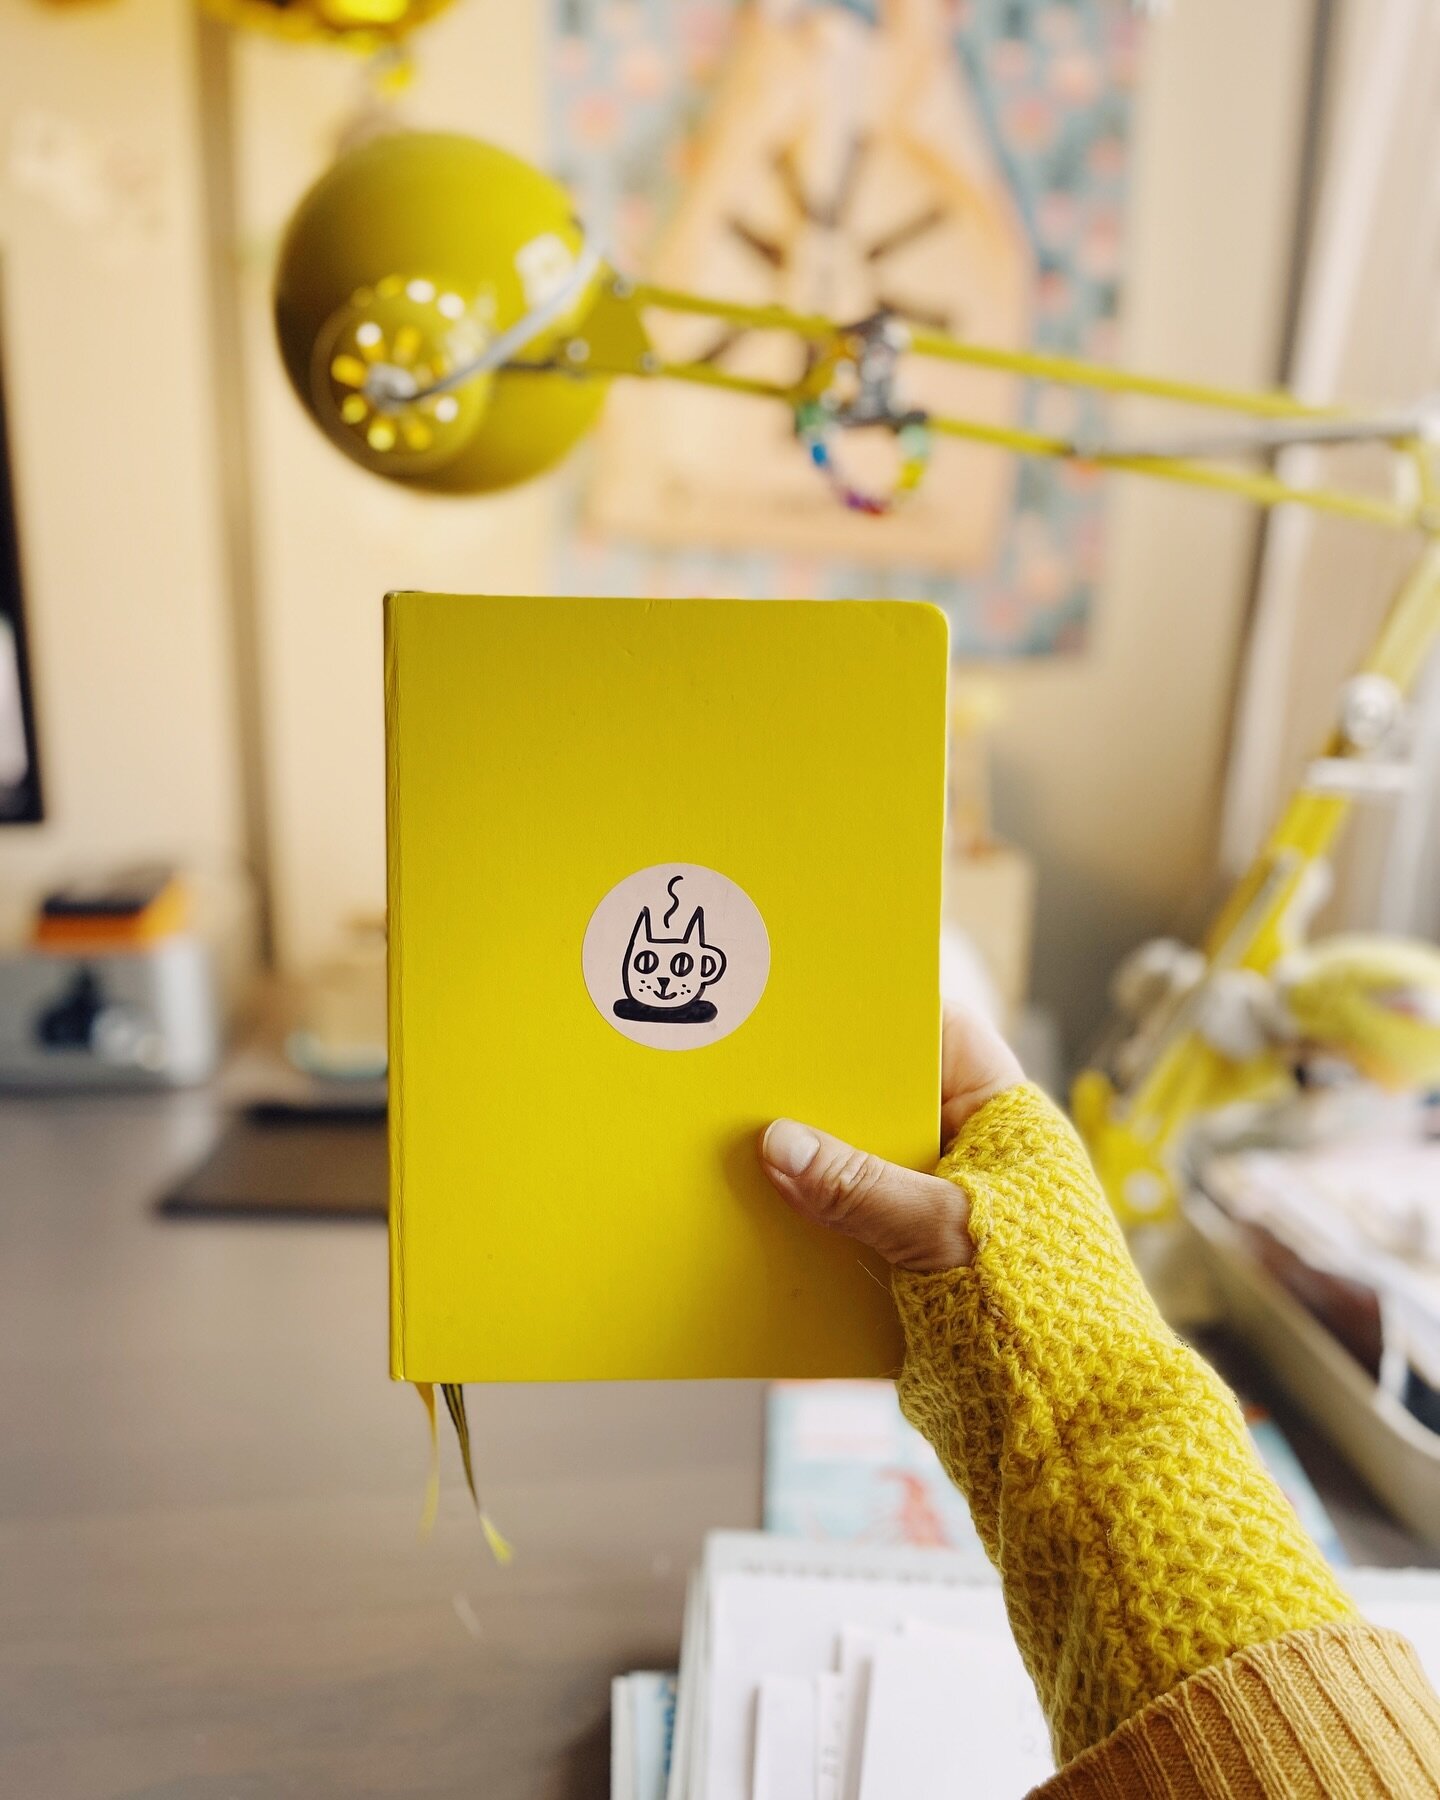 Wrapped up in my yellow cozy zone, sketchbook in hand, as the fog adds a touch of mystery outside. Let&rsquo;s bring some sunshine to this misty day! ☁️🌼